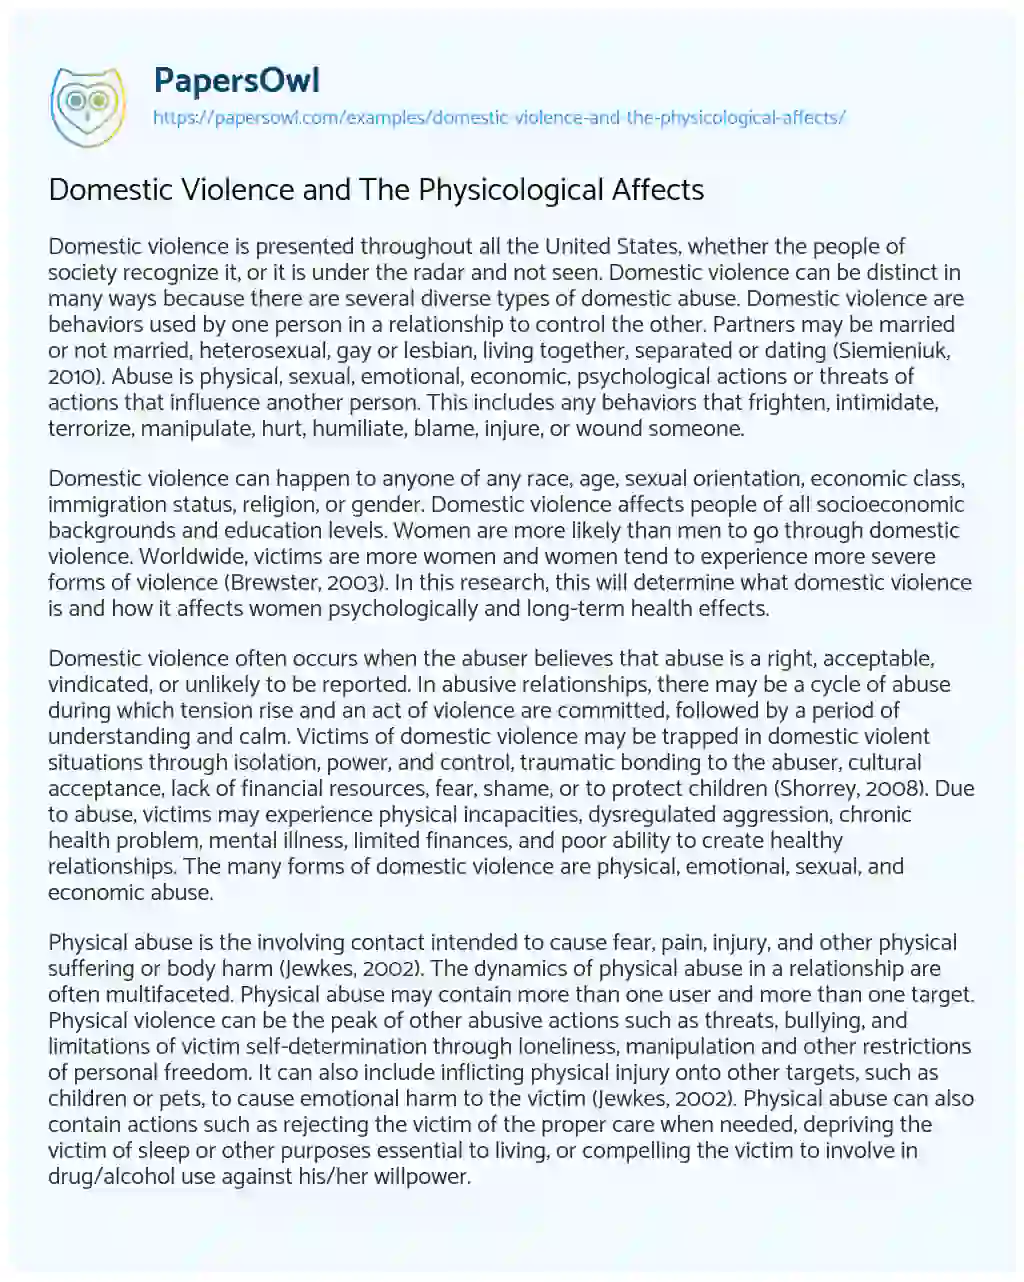 Essay on Domestic Violence and the Physicological Affects